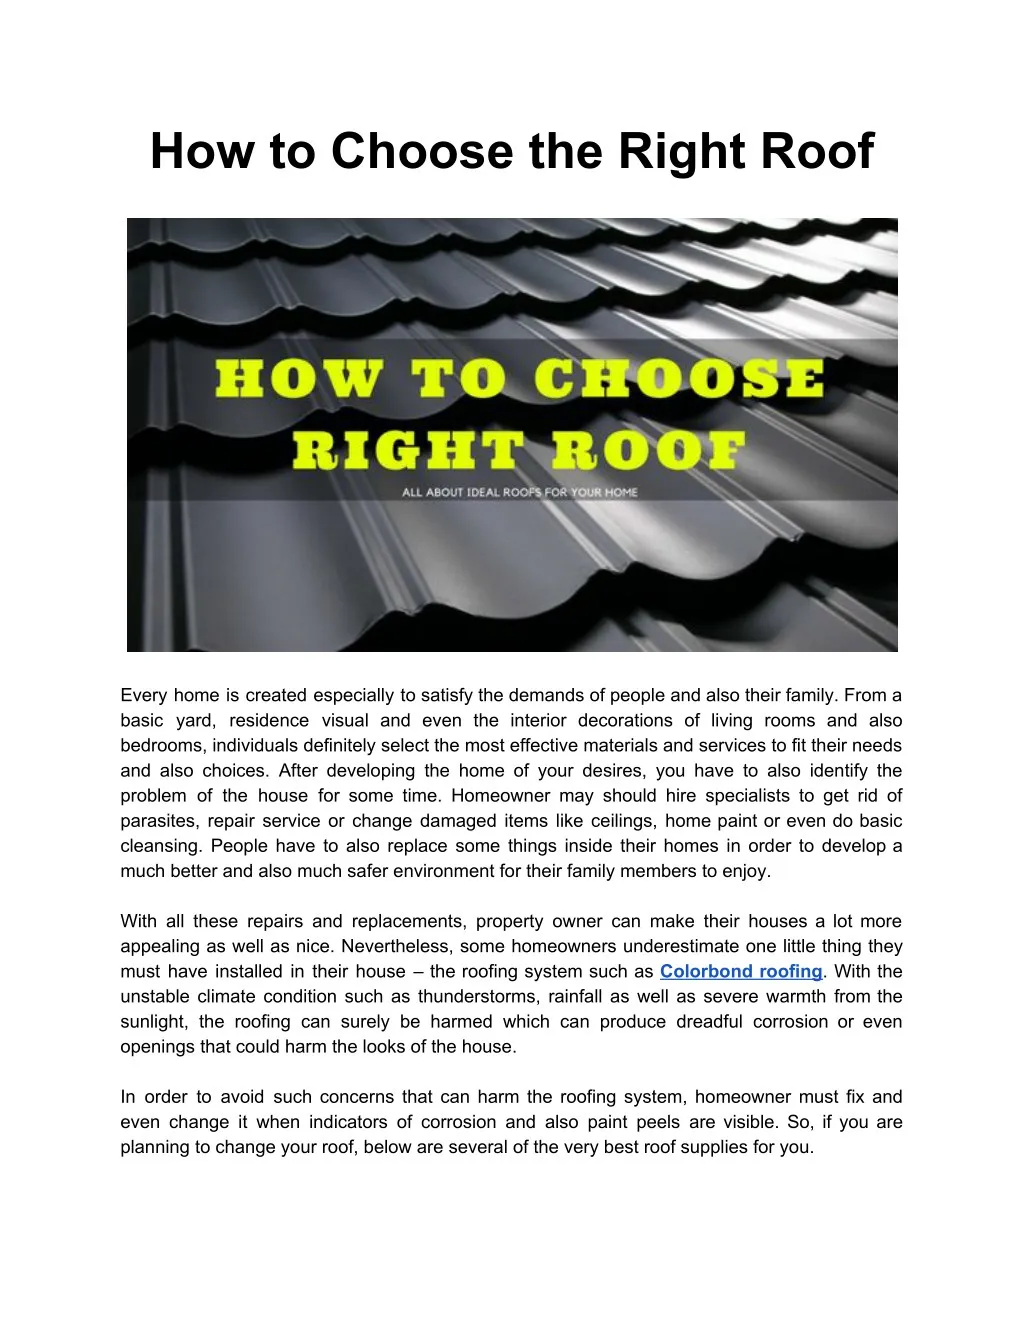 how to choose the right roof